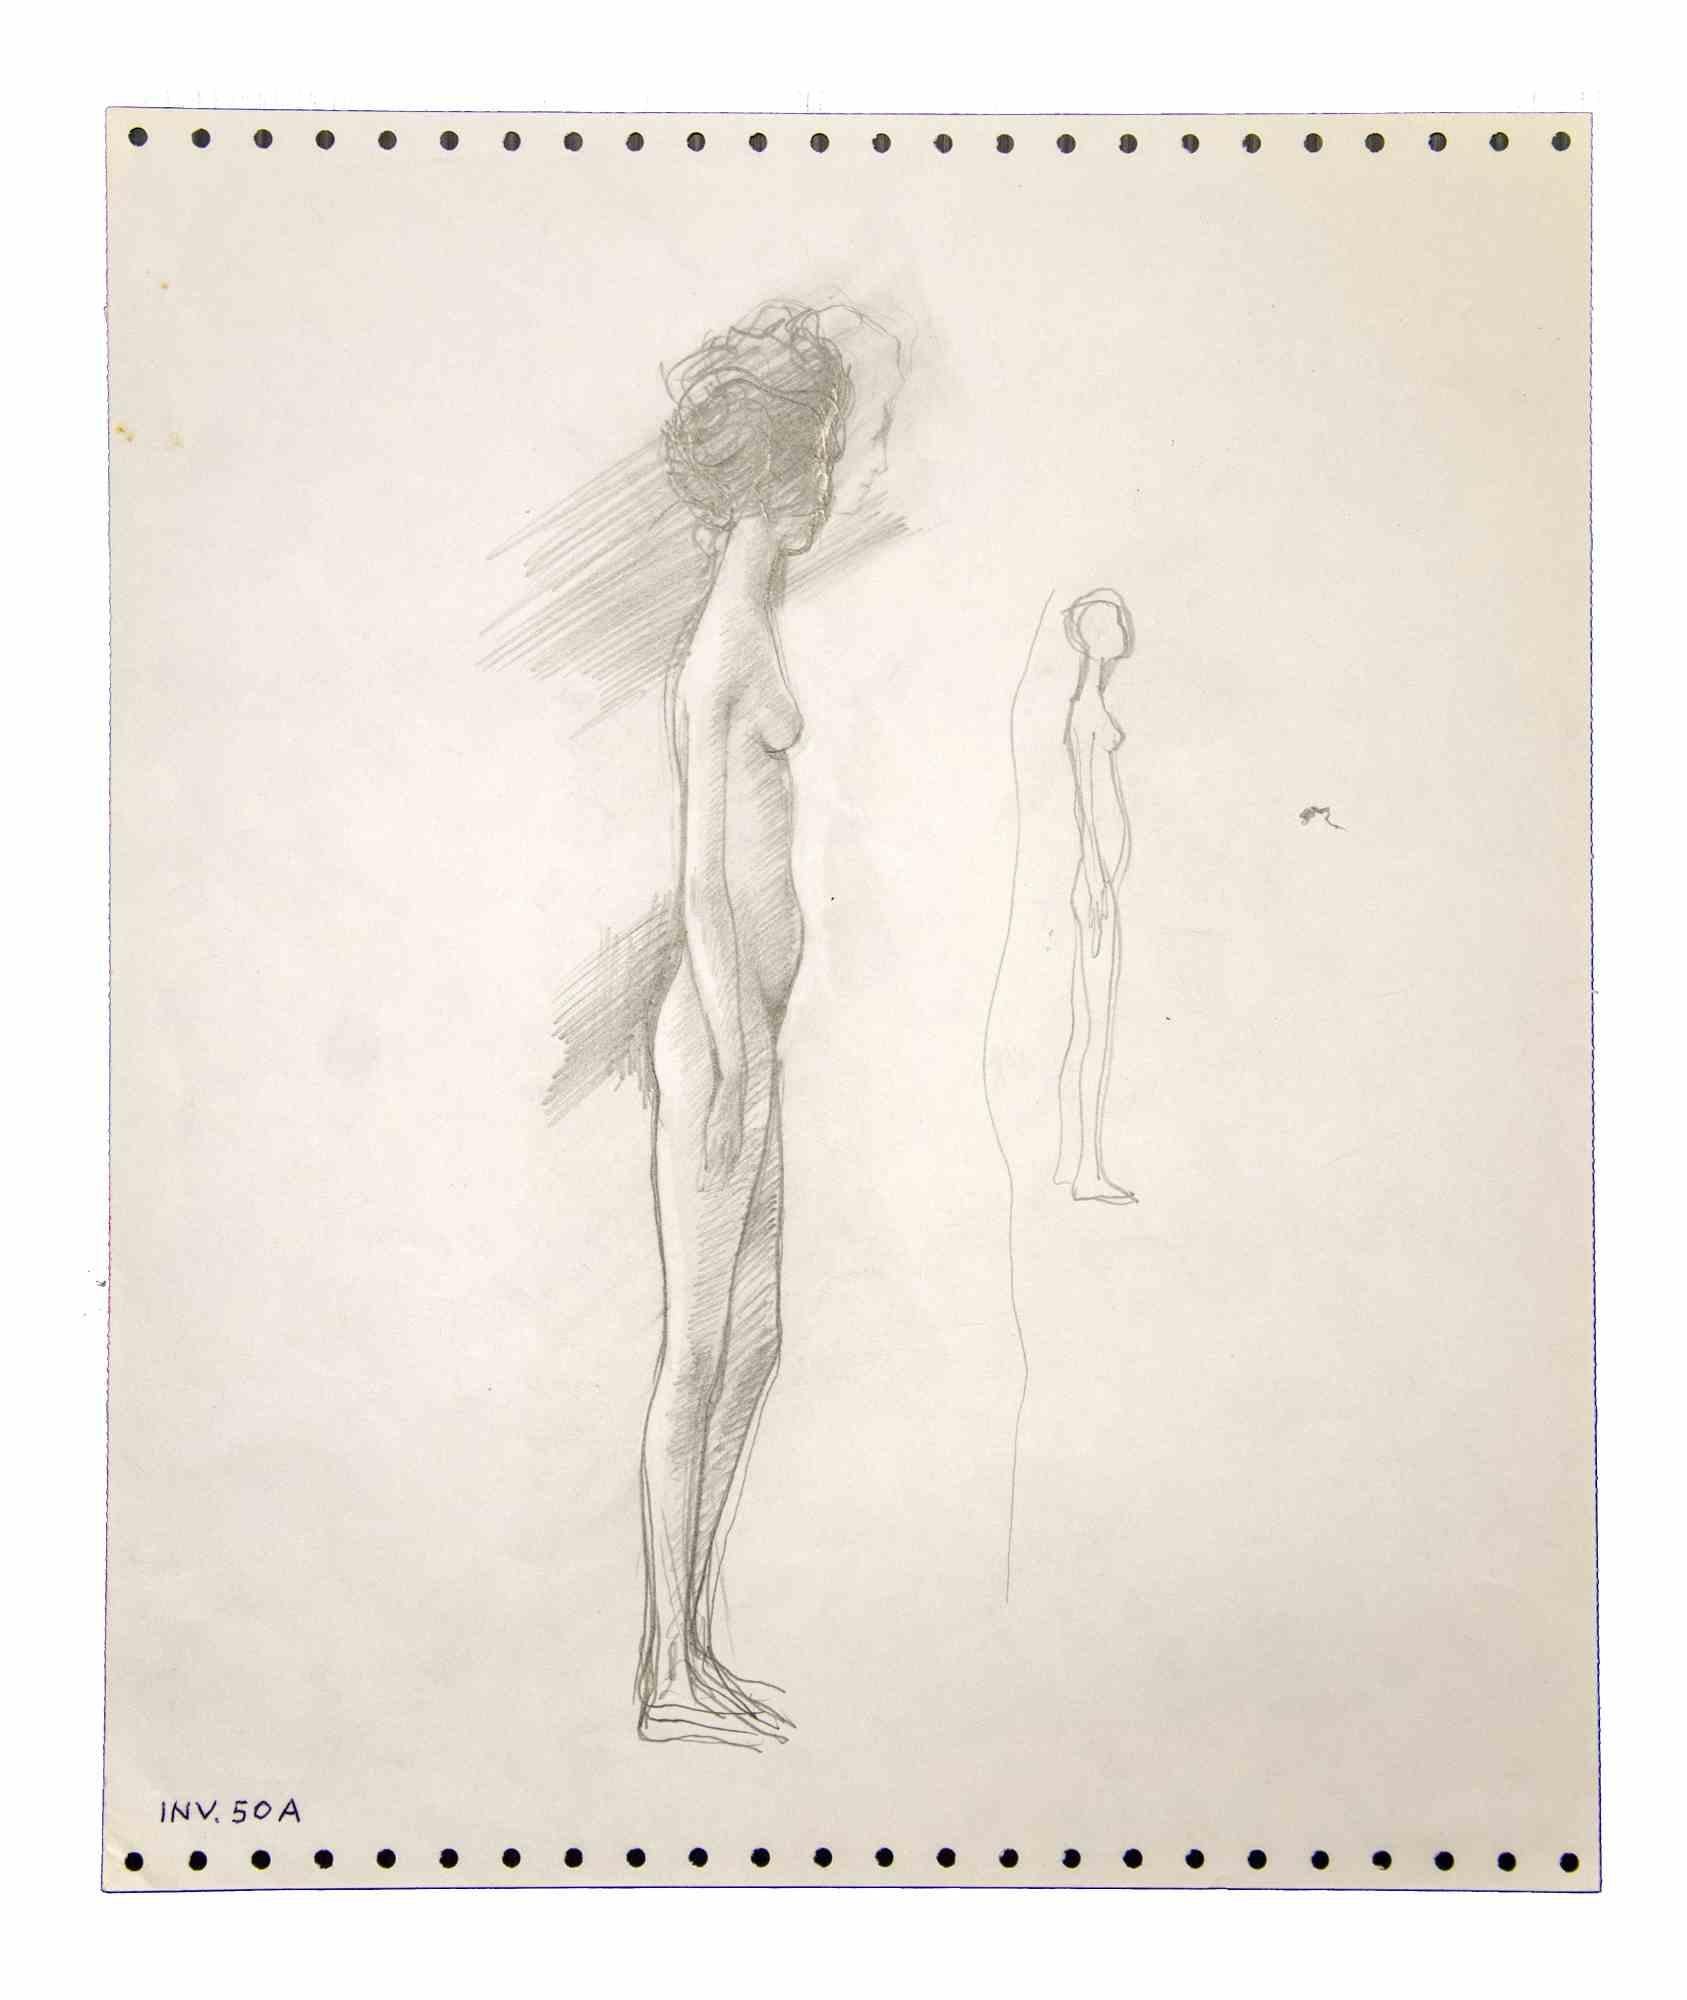 Standing Nude is an original drawing in pencil on paper realized by Leo Guida in the 1970s.

Good condition.

Leo Guida  (1992 - 2017). Sensitive to current issues, artistic movements and historical techniques, Leo Guida has been able to weave with